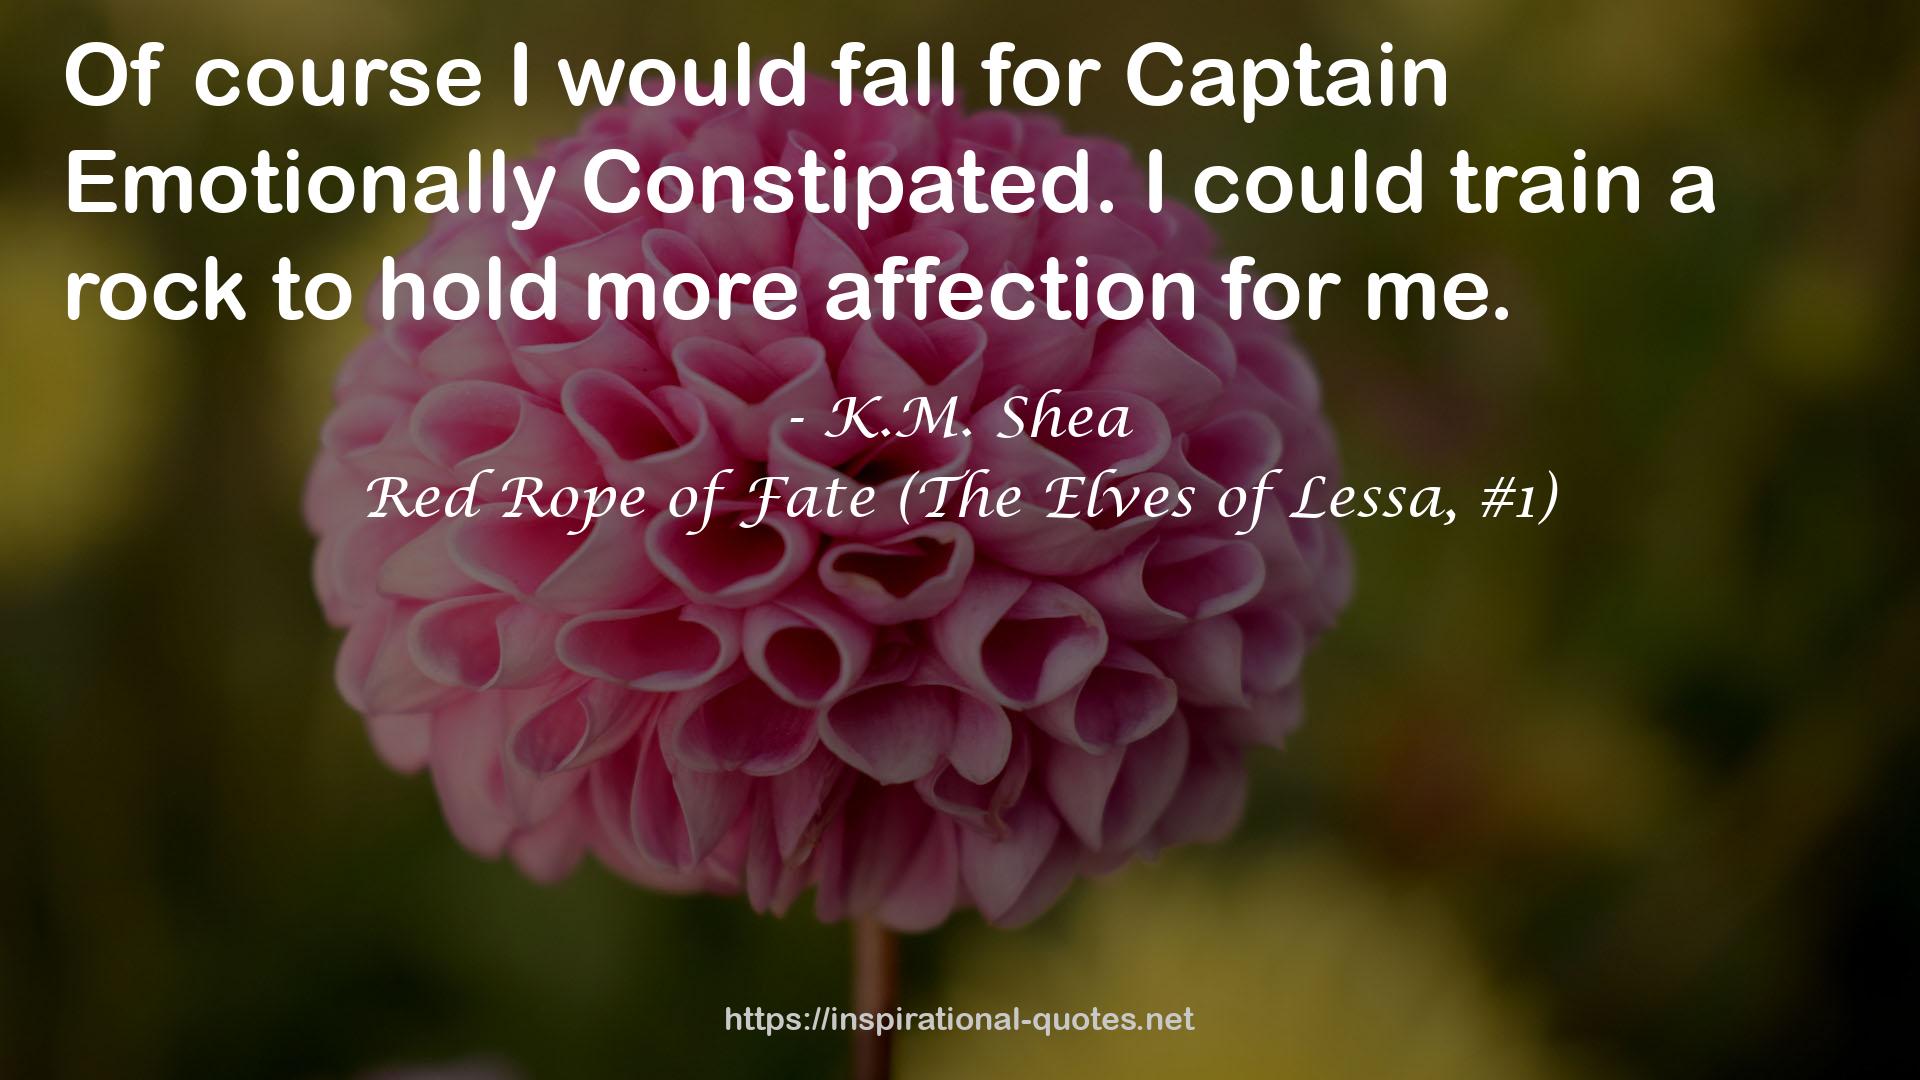 Red Rope of Fate (The Elves of Lessa, #1) QUOTES